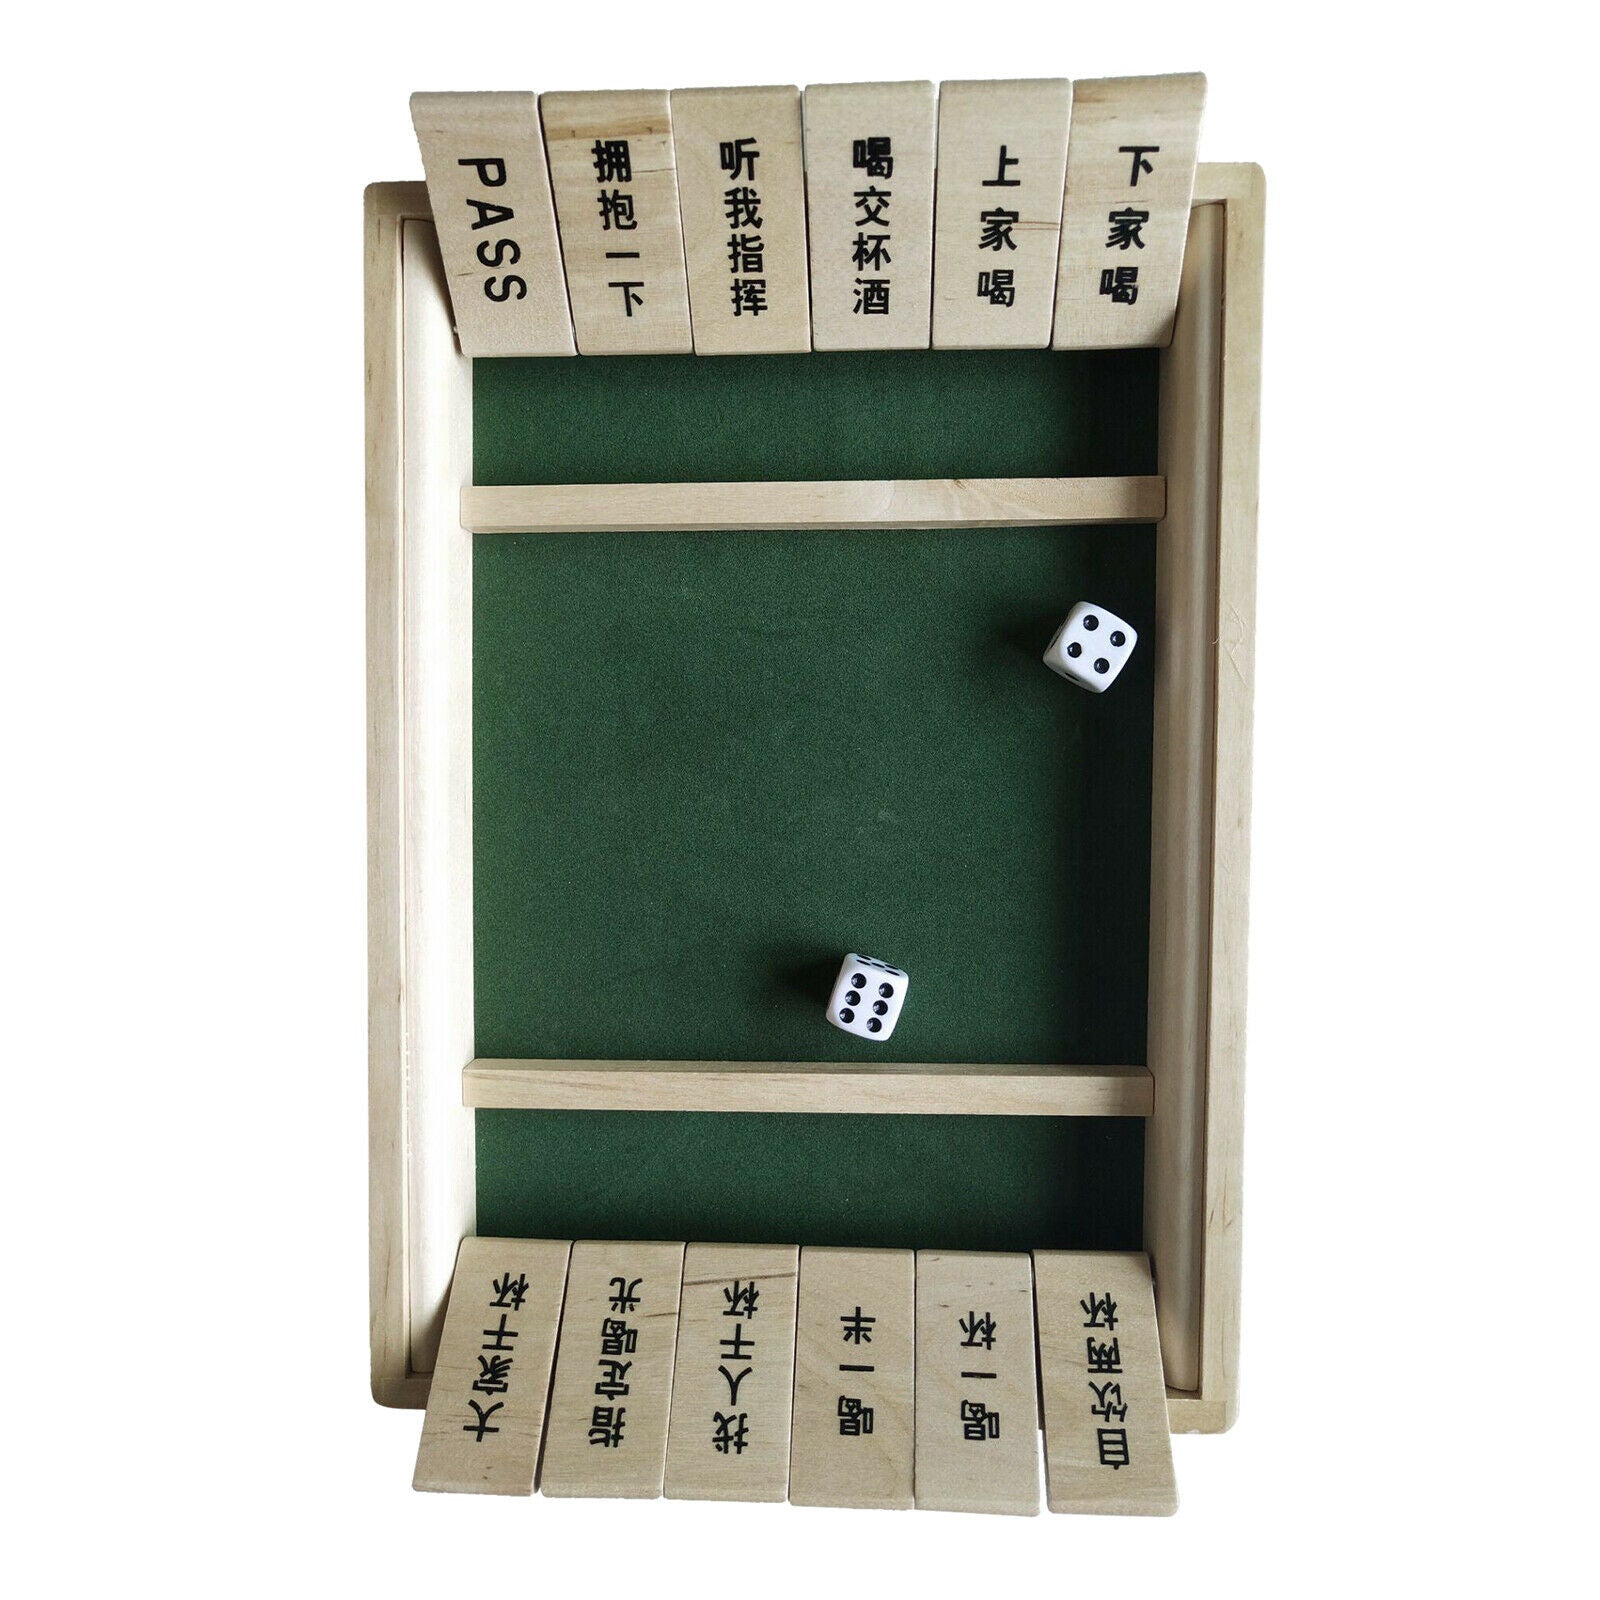 1-2 Players Shut The Box Dice Game,Classic Wooden Board Game with 2 Dice and